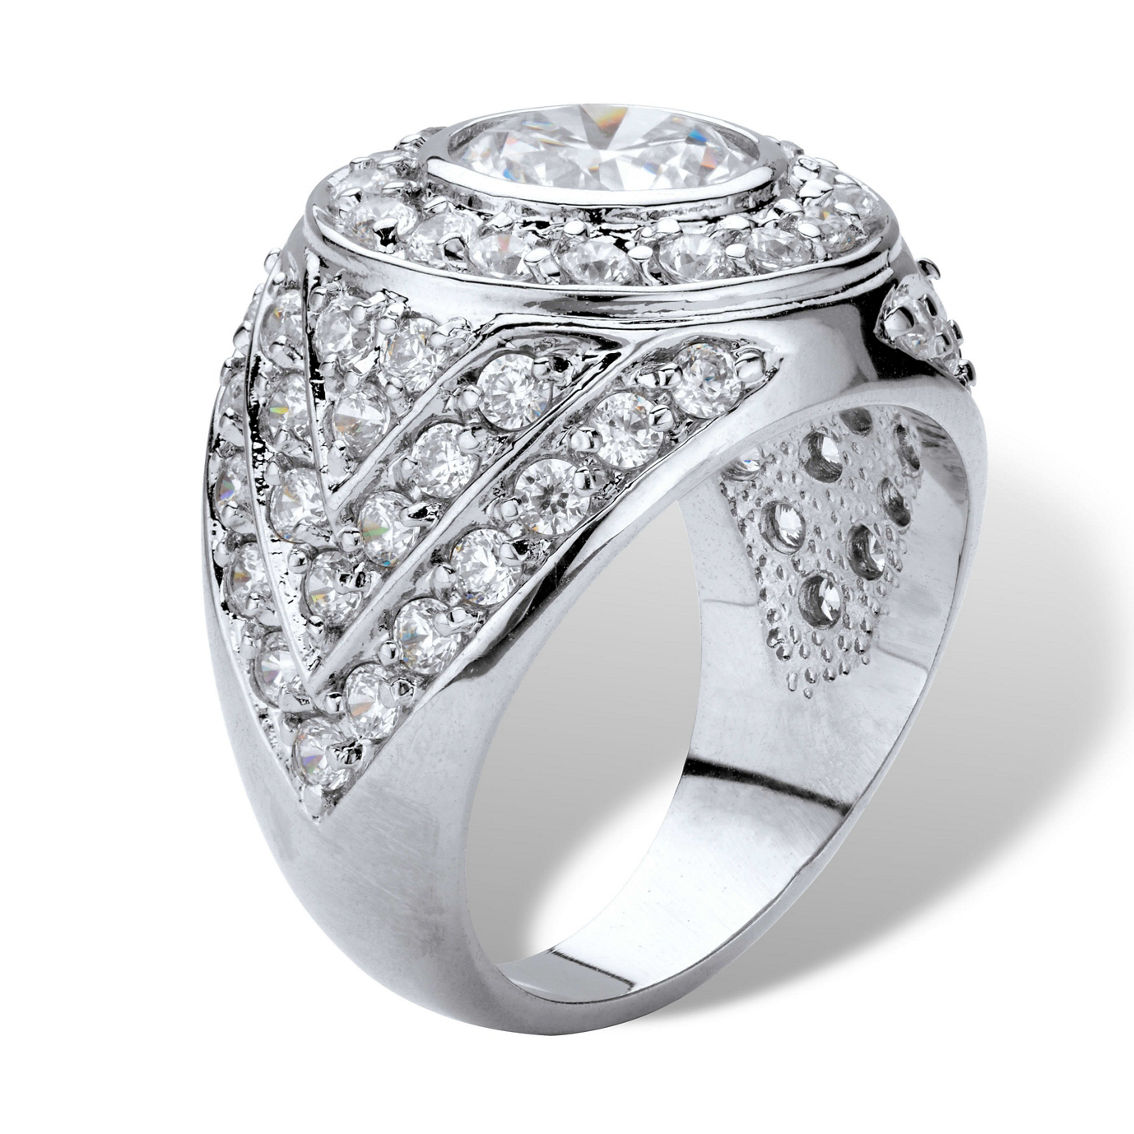 PalmBeach Men's 4.55 Cttw. Cubic Zirconia Platinum-Plated Geometric Cluster Ring - Image 2 of 5